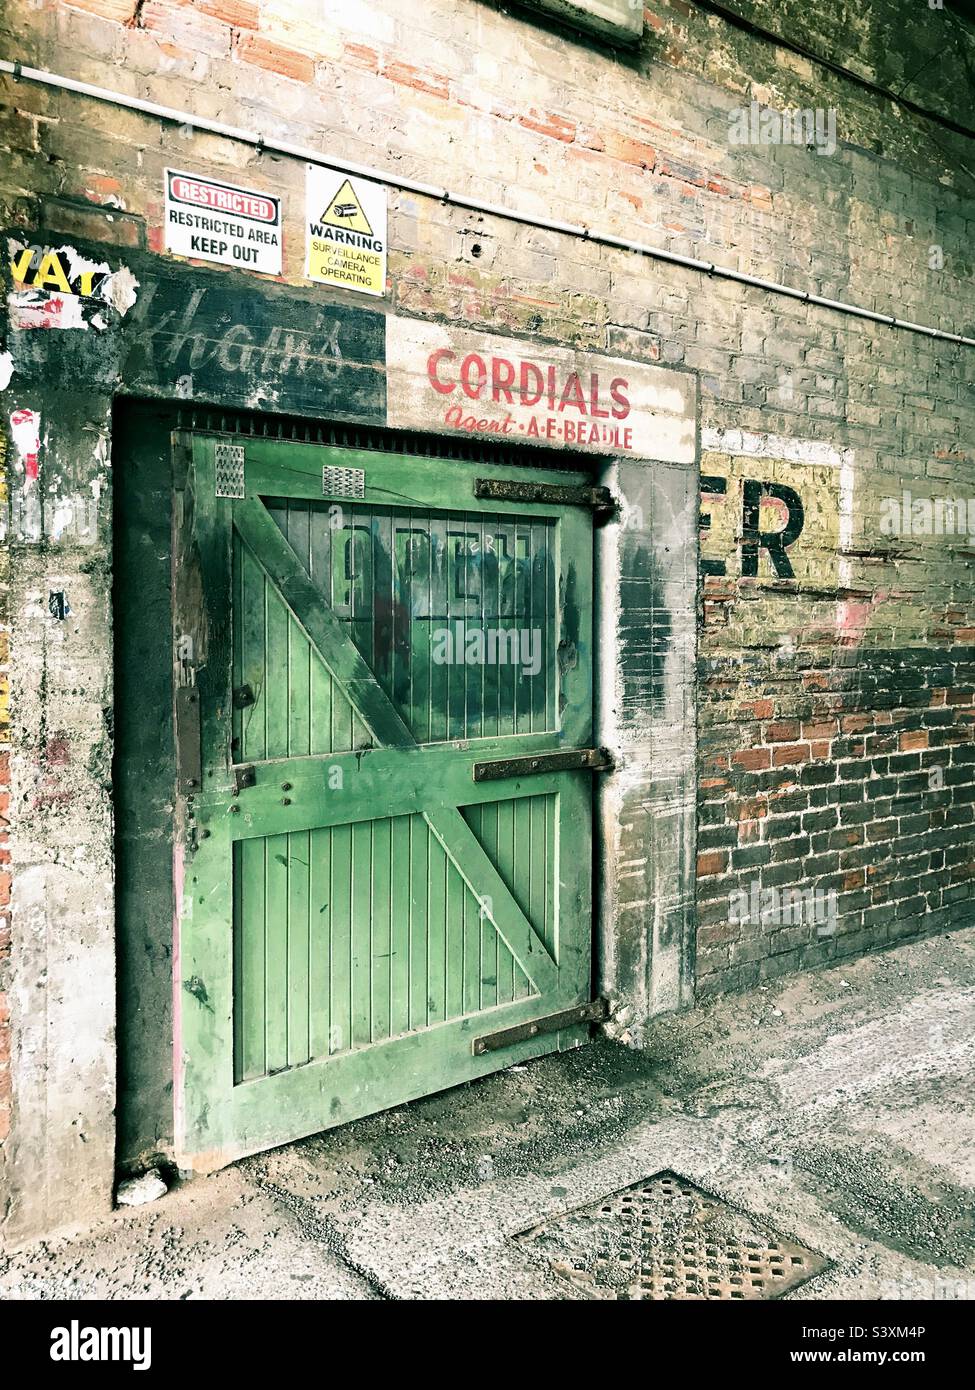 Green rustic door in a dark alleyway with red brick and vintage sign-writing, in central Invercargill, New Zealand. Stock Photo